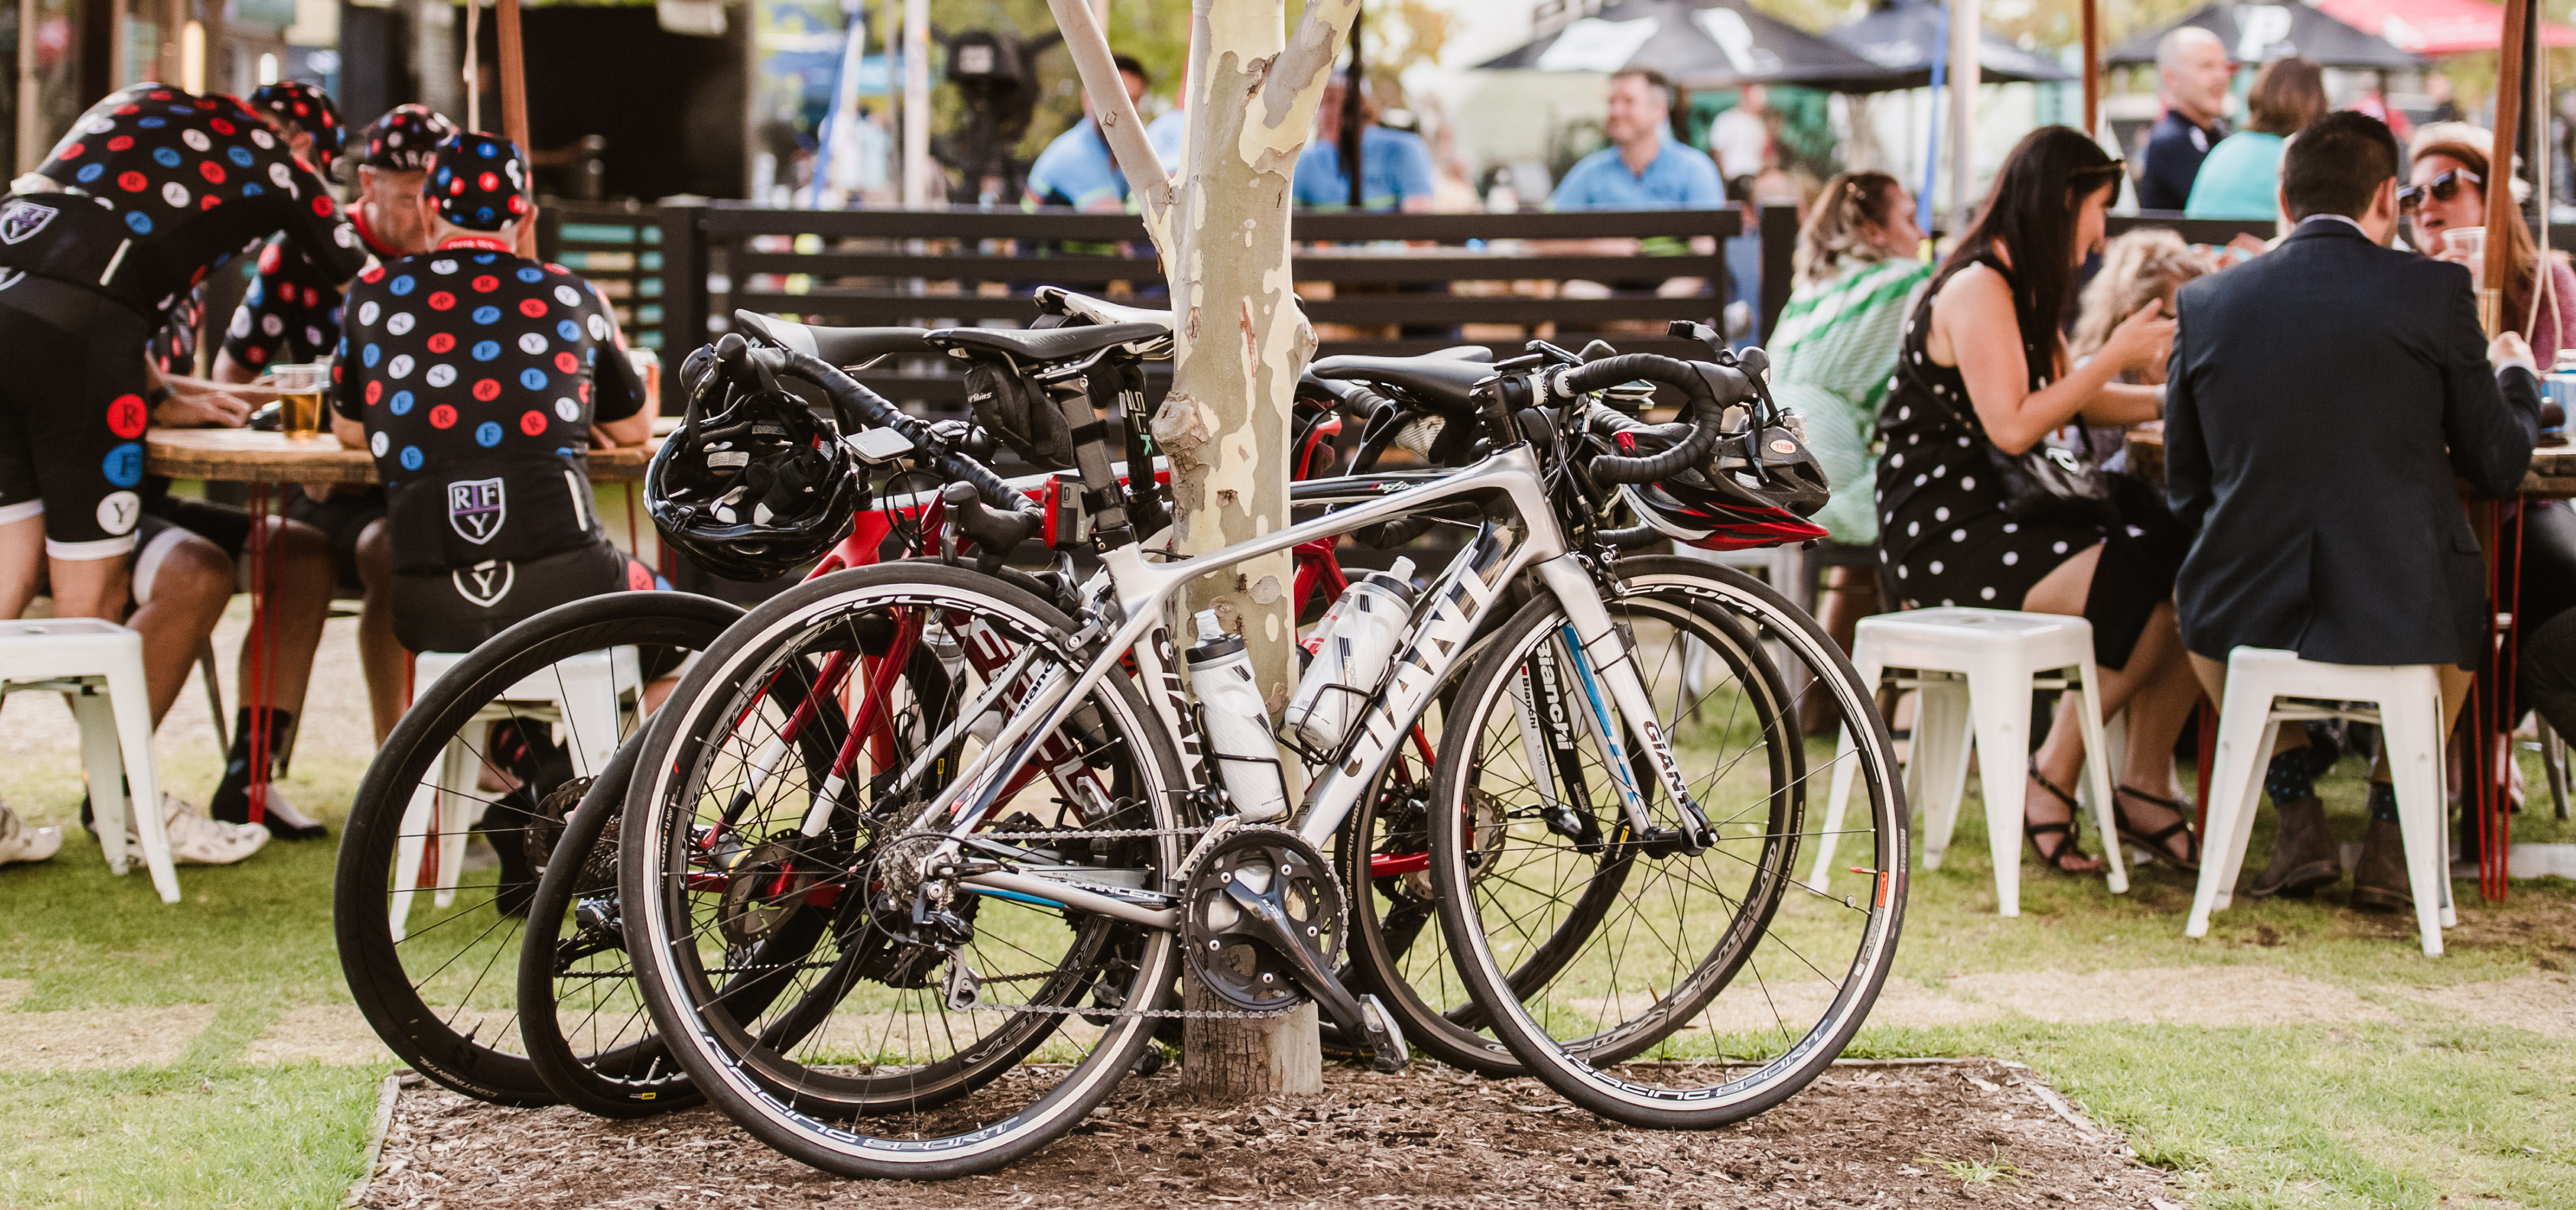 Your 9-day guide to the Santos Festival of Cycling Tour Down Under